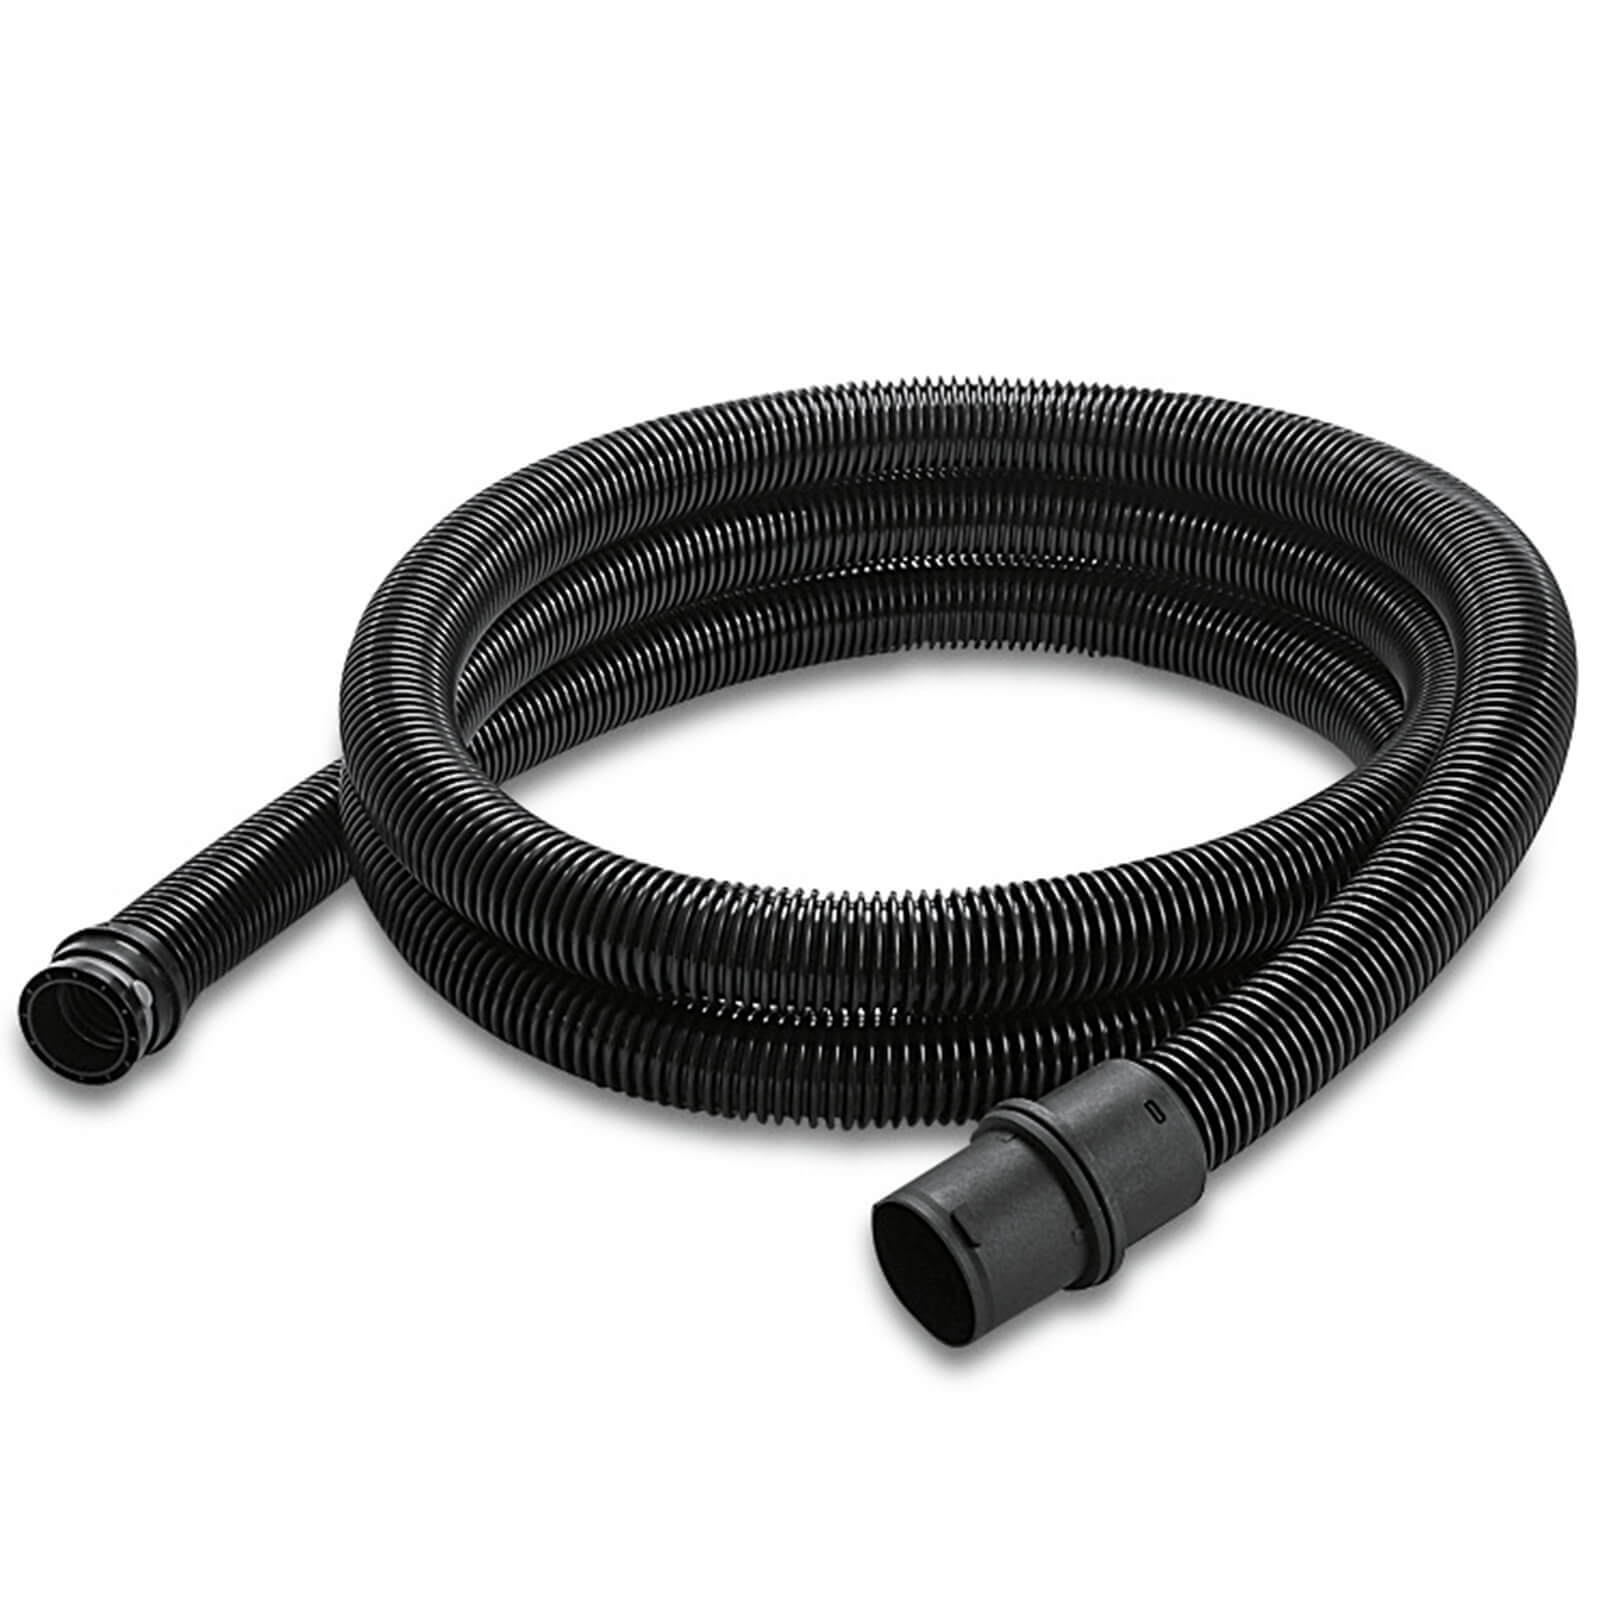 Image of Karcher Suction Hose for NT 65/2 and NT 70/2 Vacuum Cleaners 40mm 4m